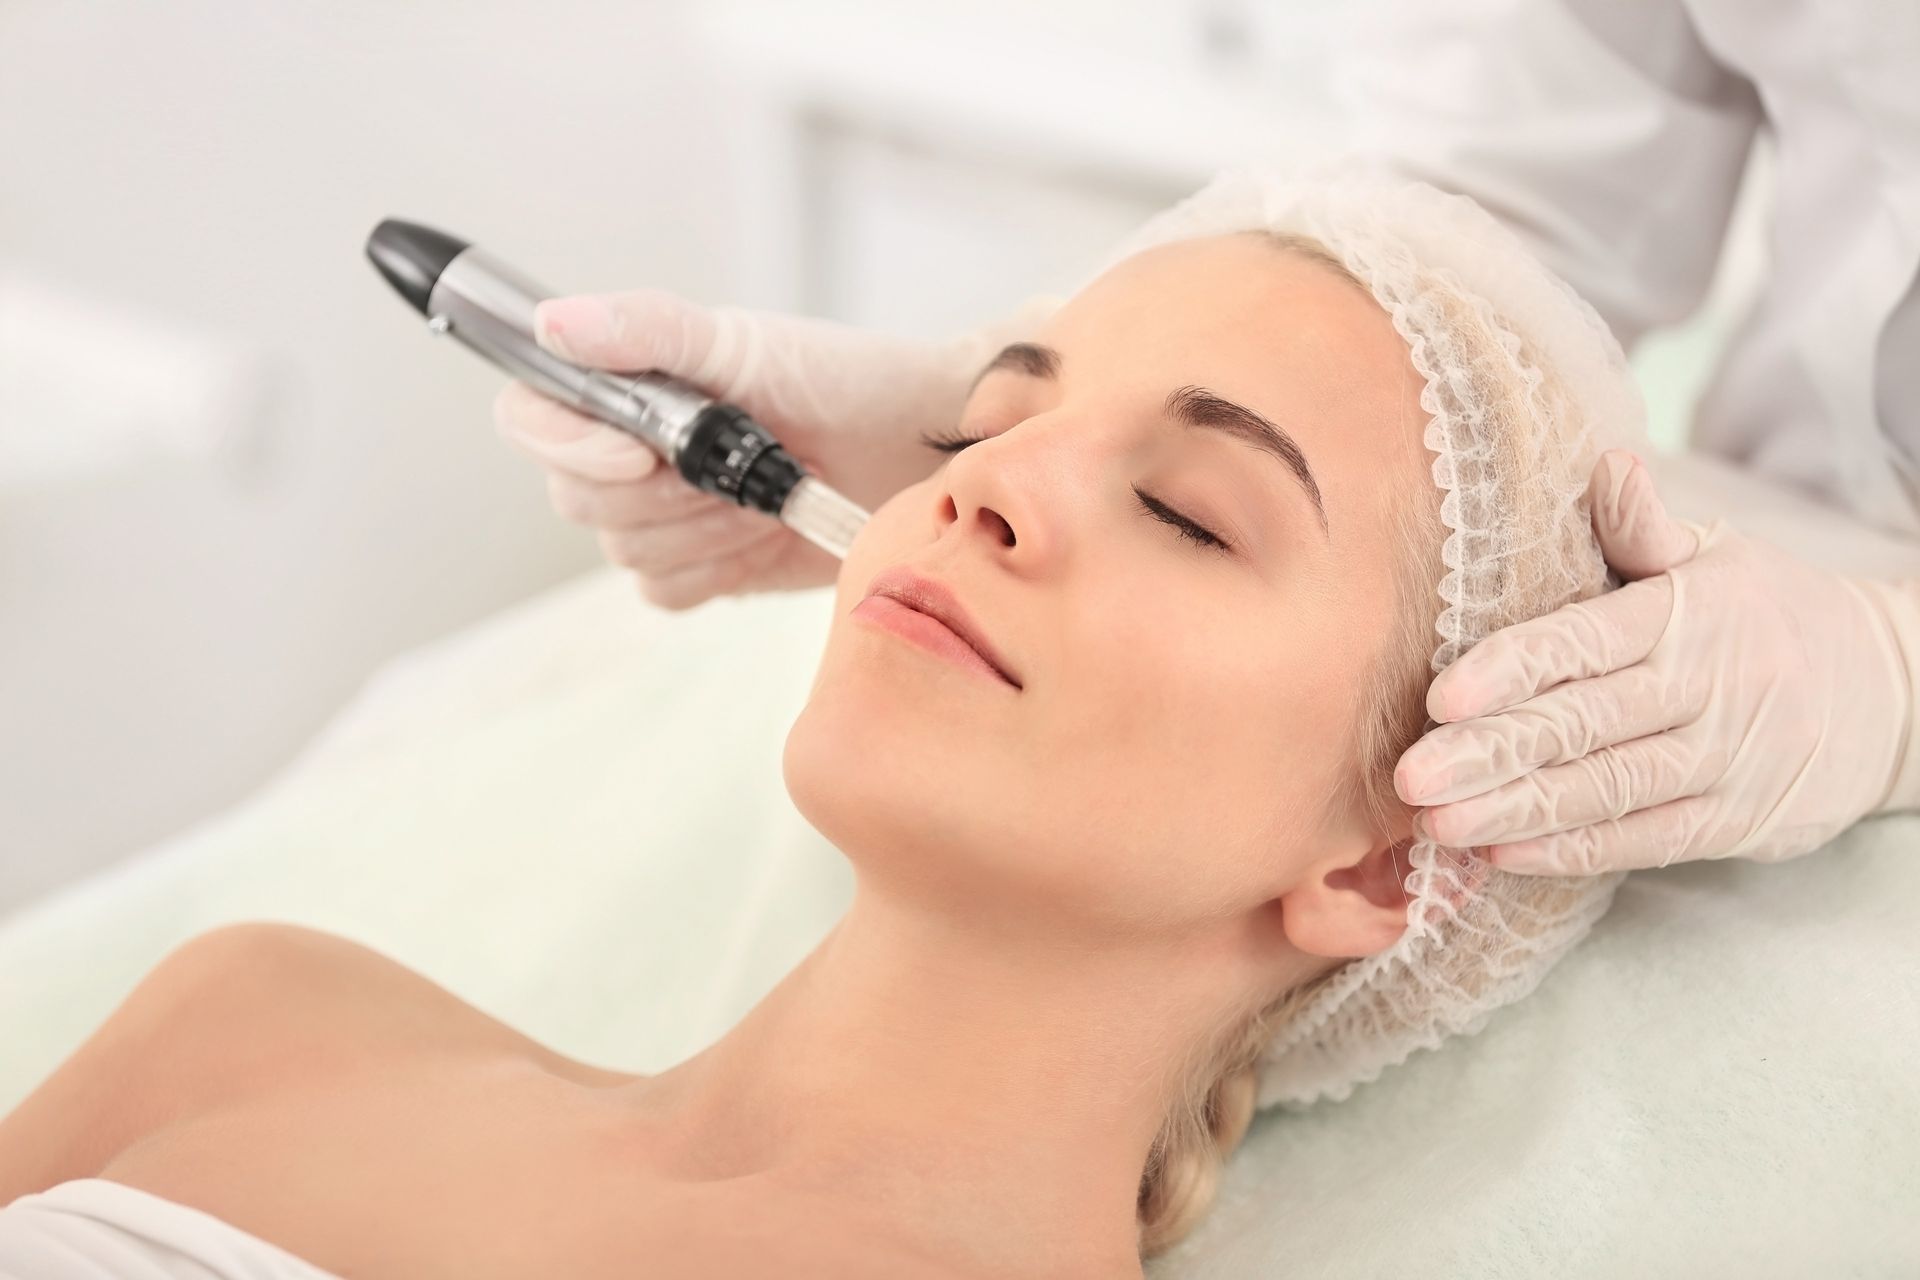 a woman is getting a microdermabrasion treatment on her face.